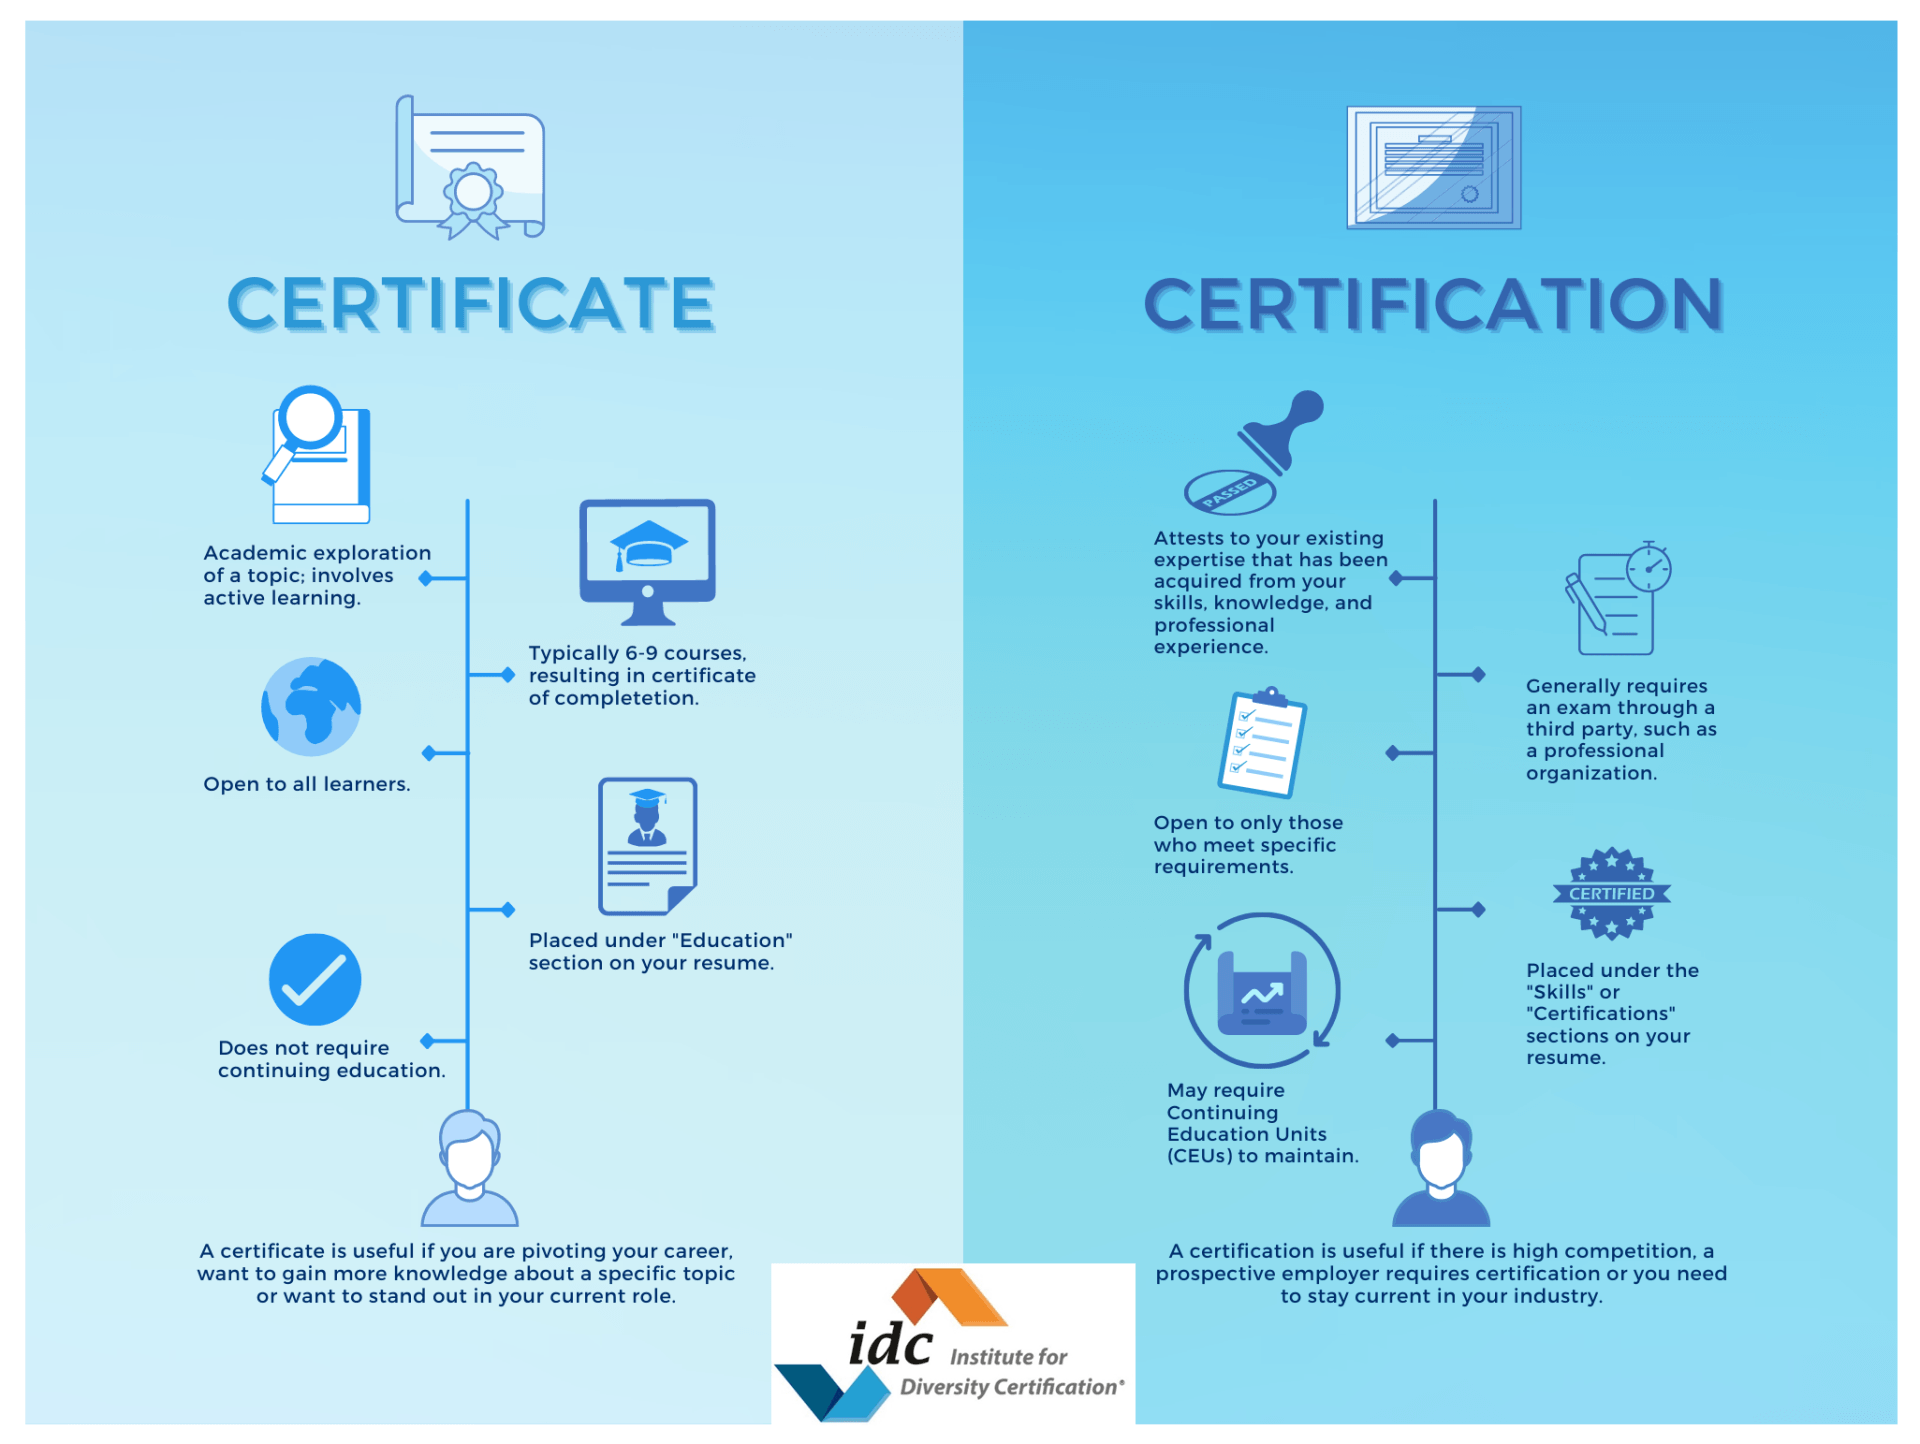 An infographic depicting the differences between a certificate and certification